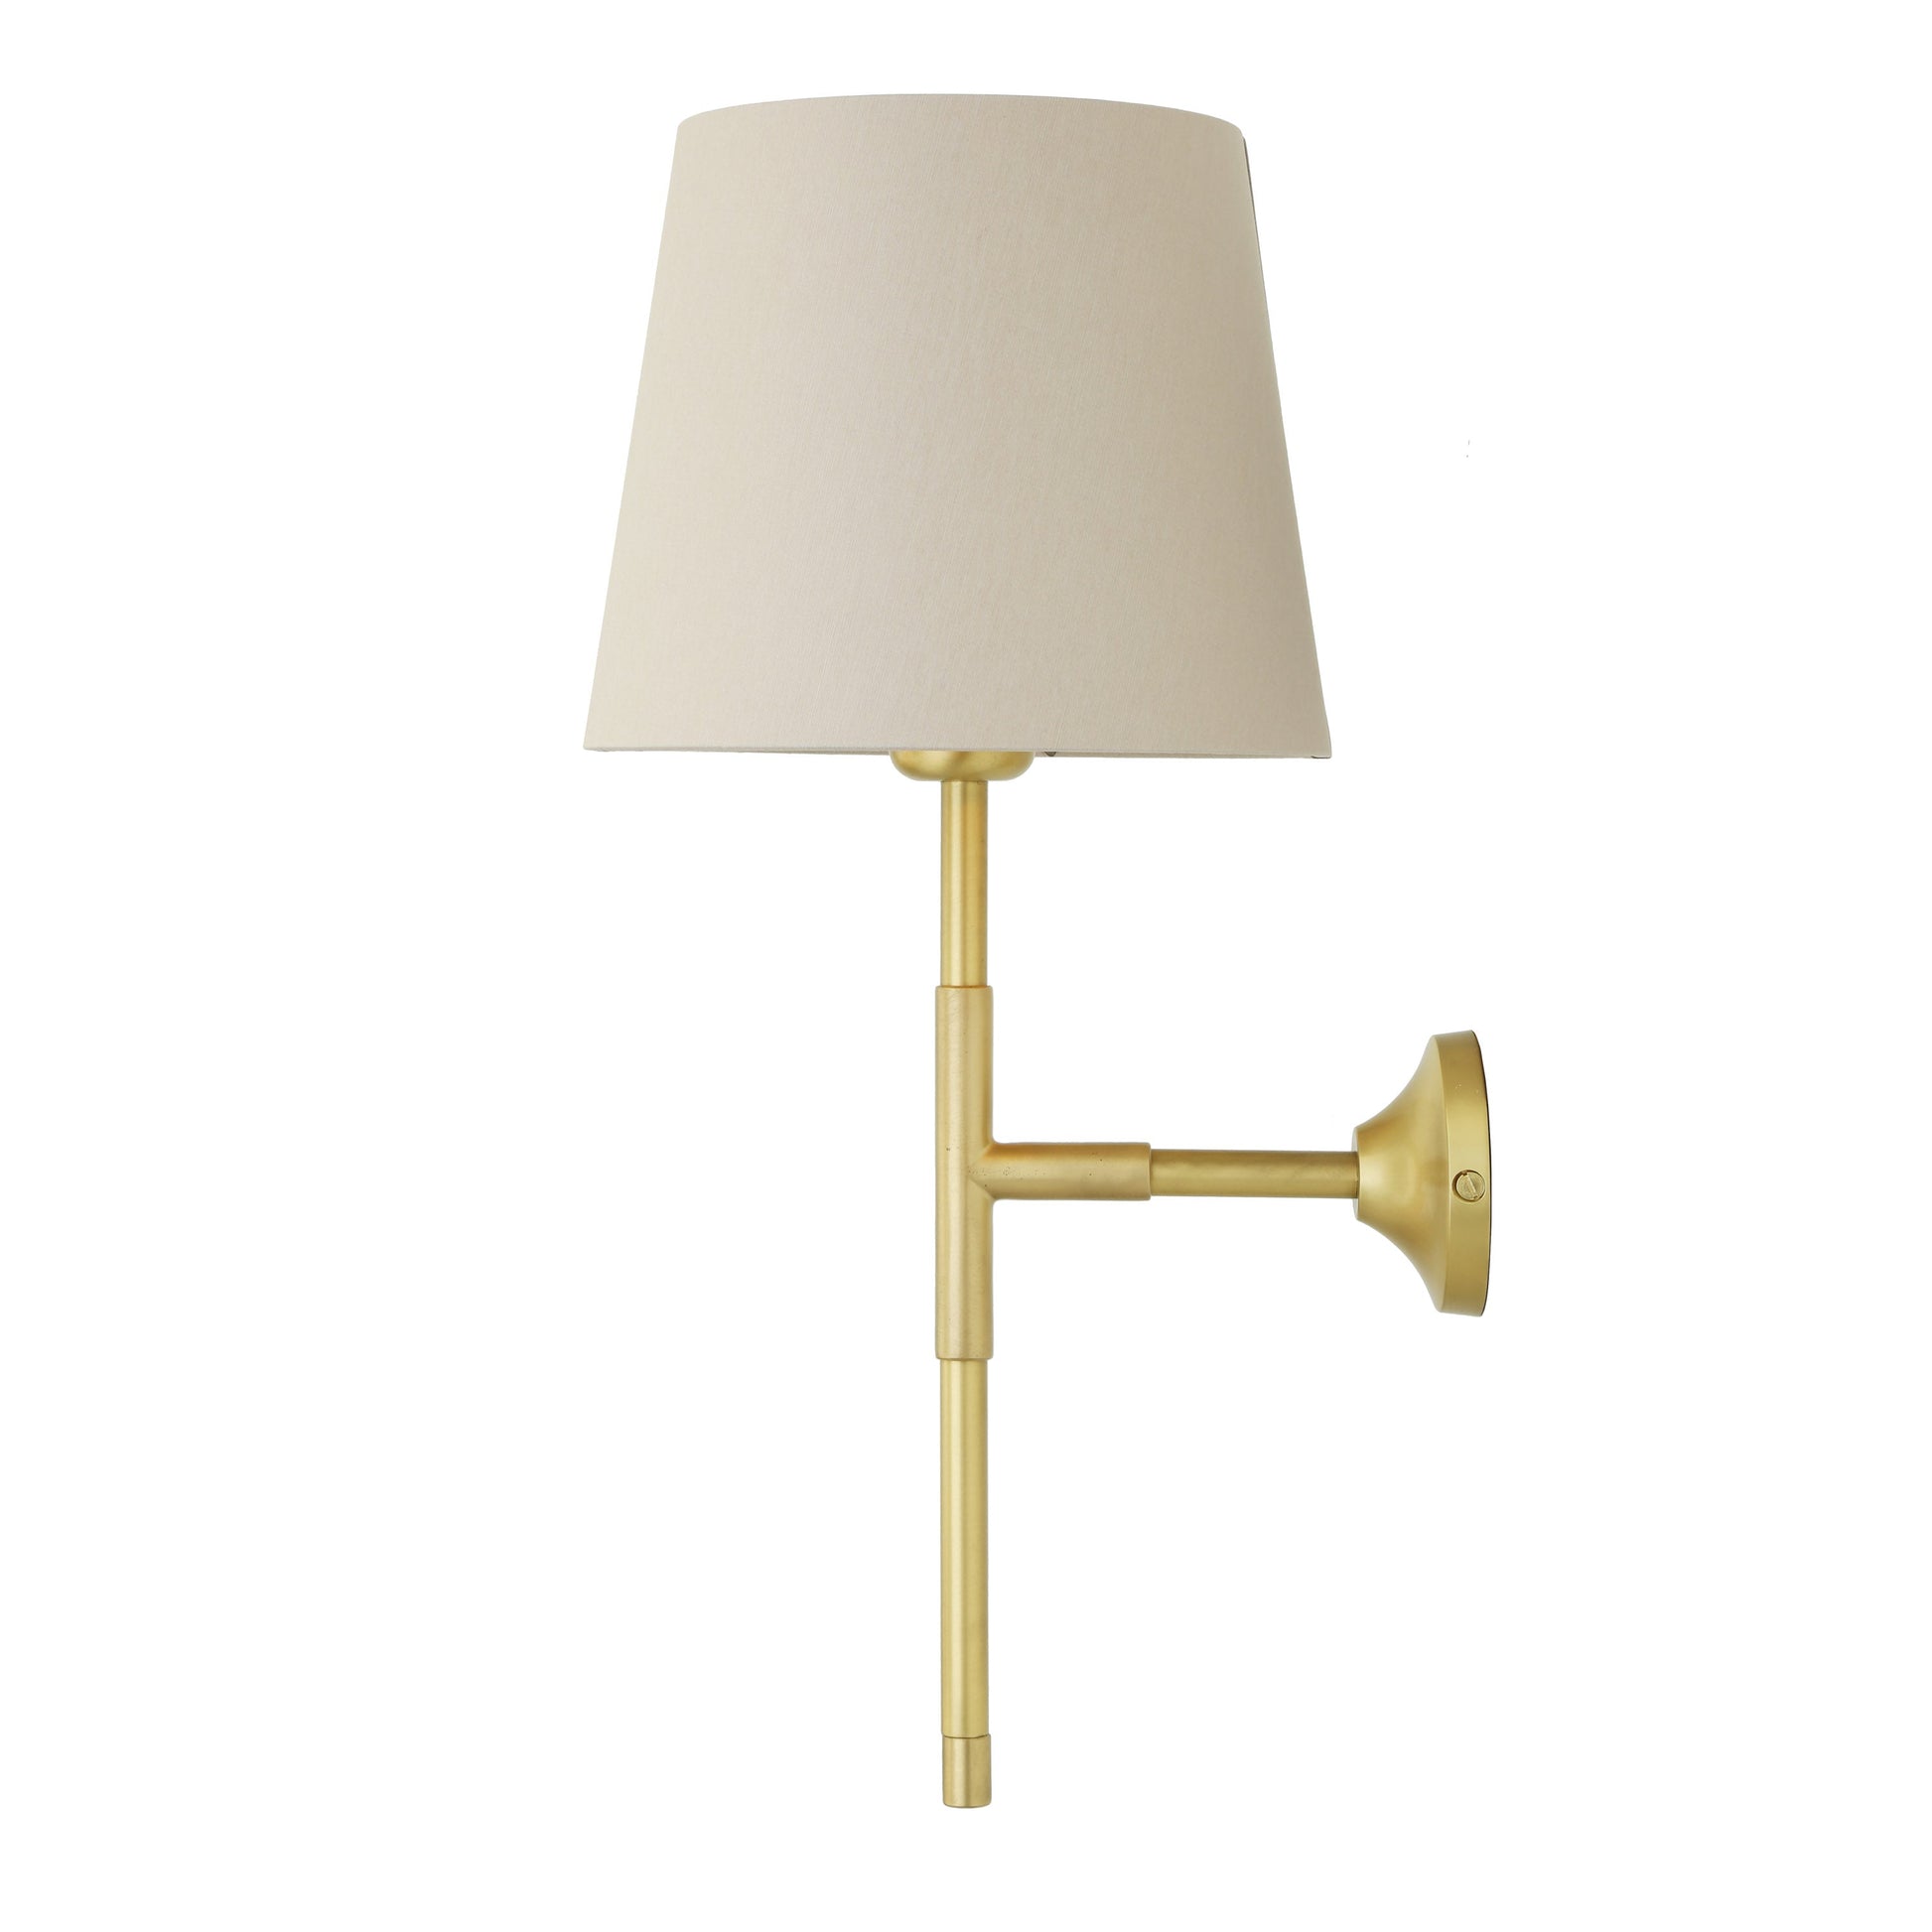 Tenby Modern Brass Wall Light with Empire Fabric Shade Product Shot